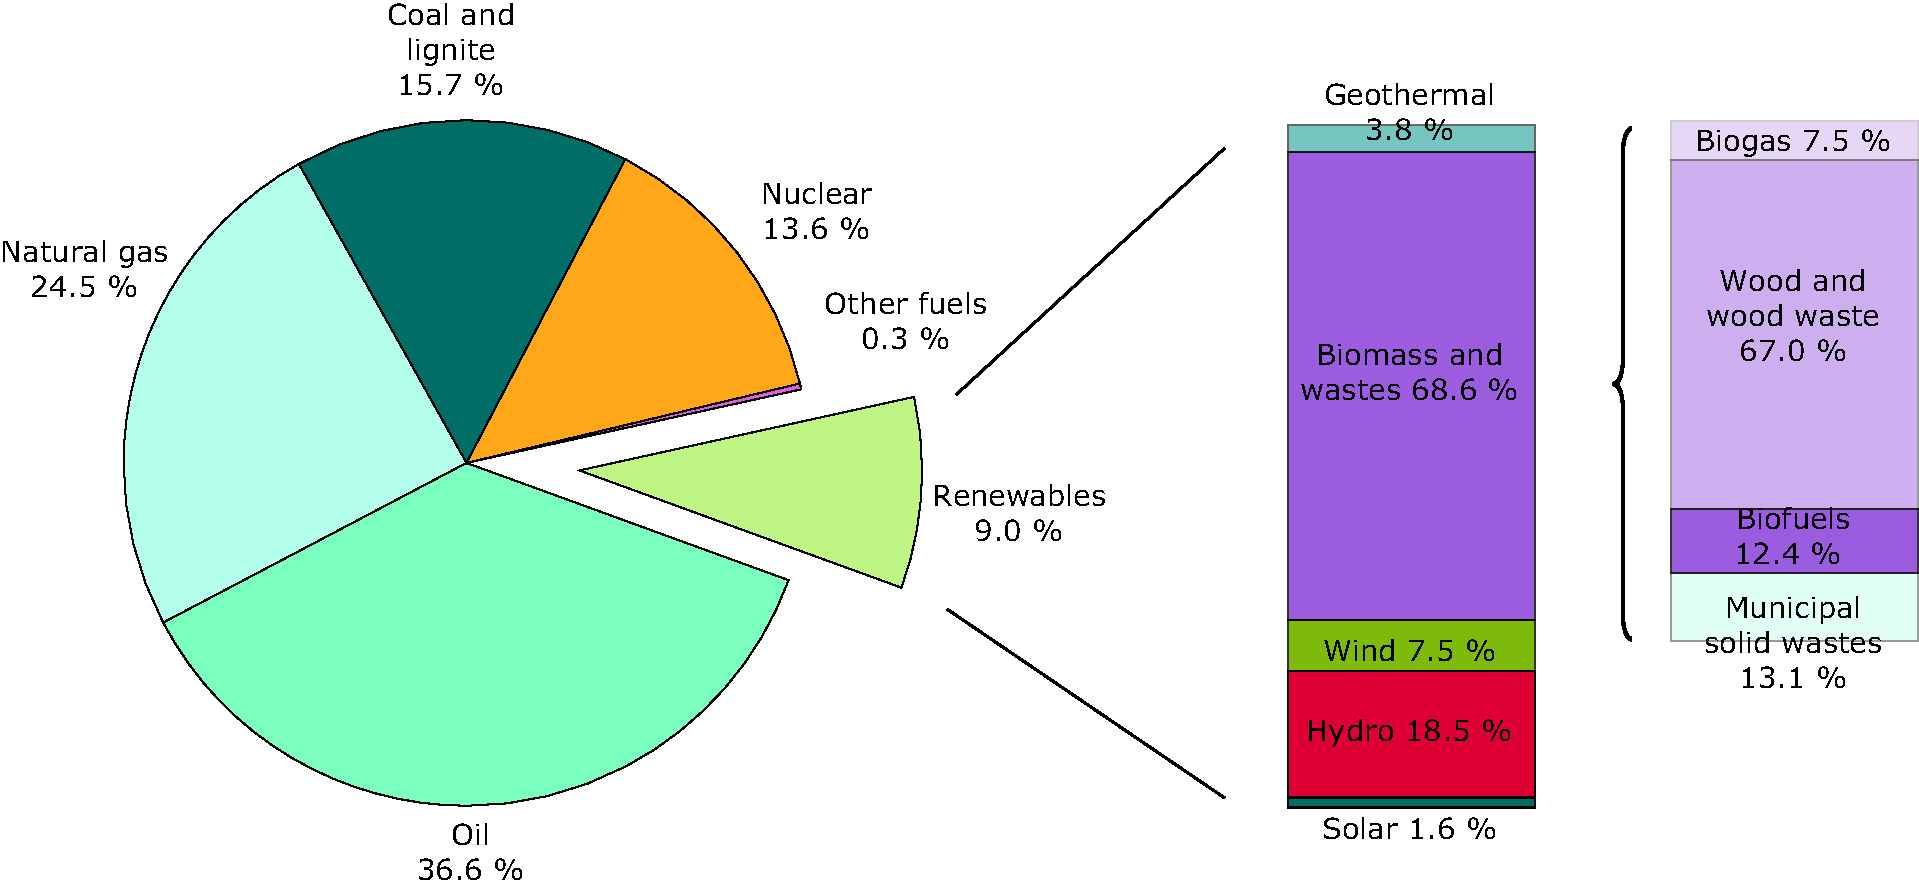 Total primary energy consumption by energy source in 2009, EU-27